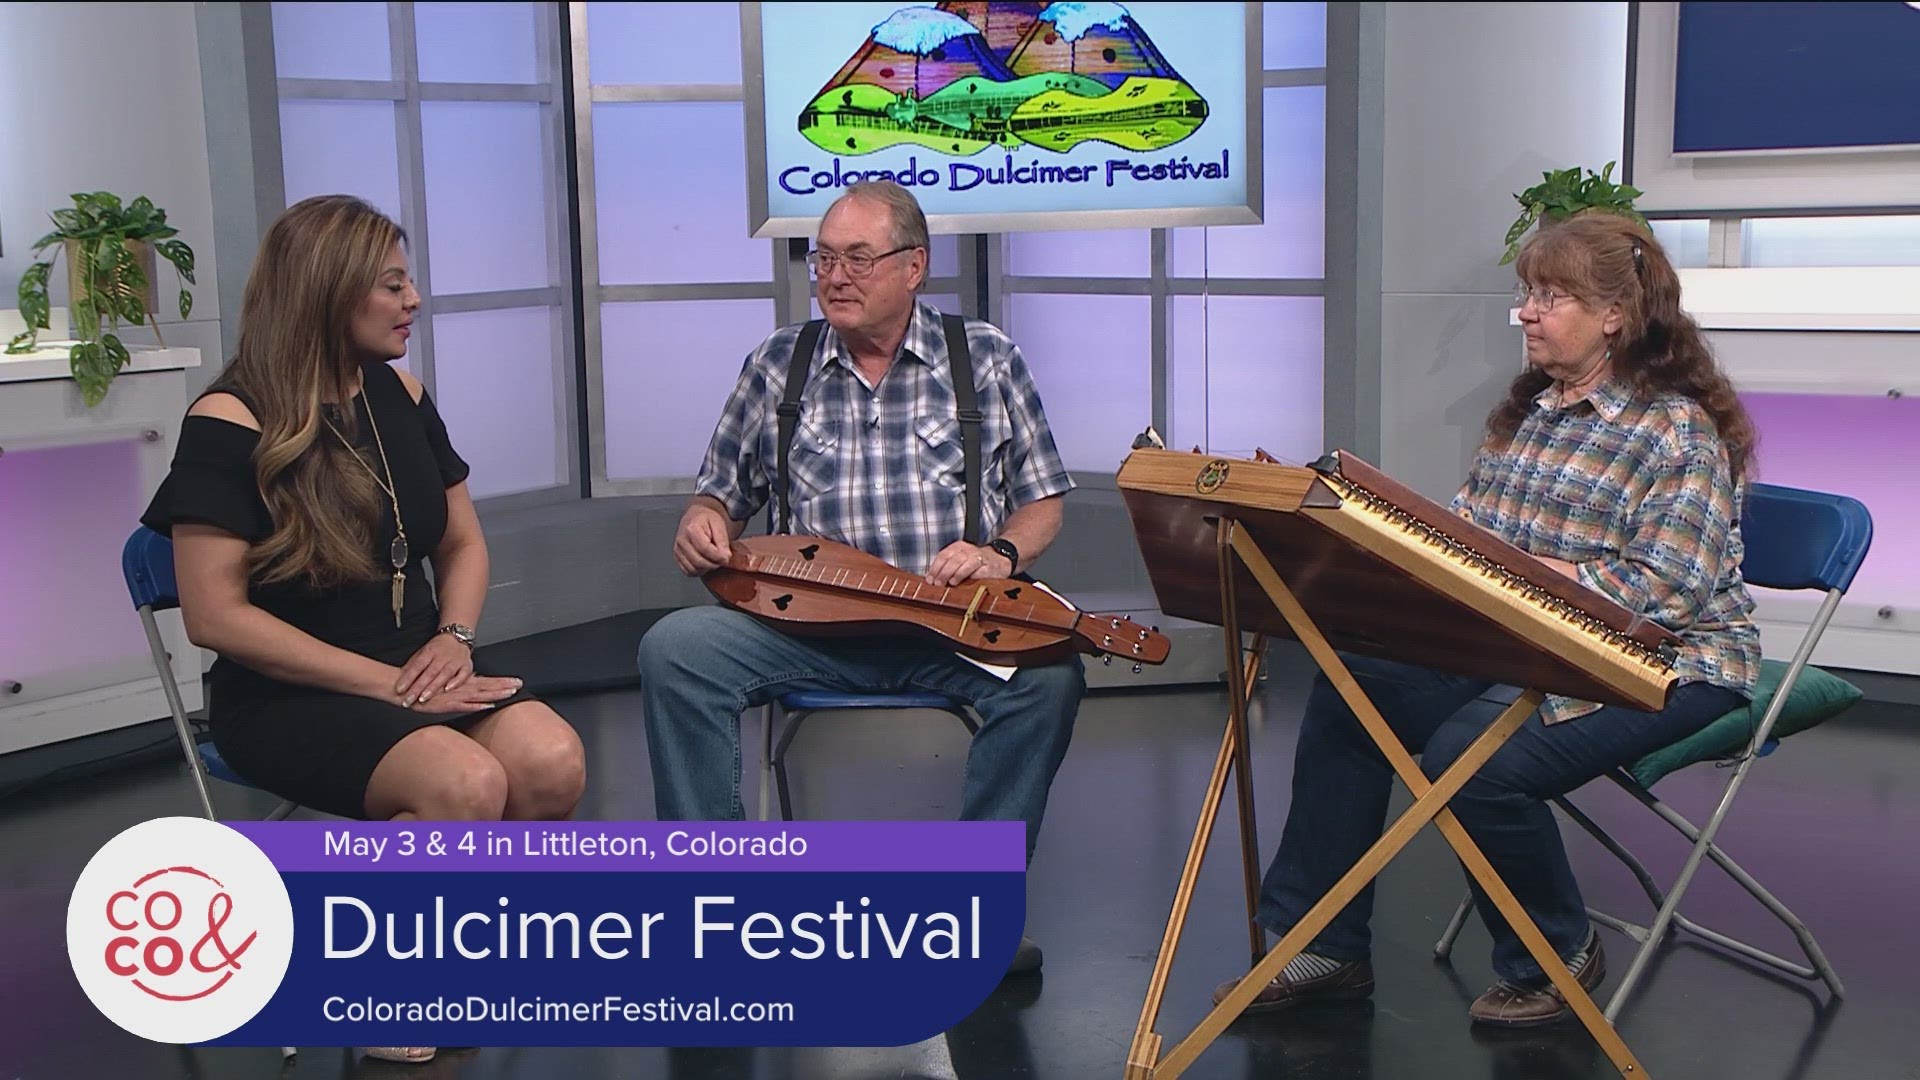 The 18th Colorado Dulcimer Festival happens May 5th and 6th at St James Presbyterian Church in Littleton. Learn more at ColoradoDulcimerFestival.com.